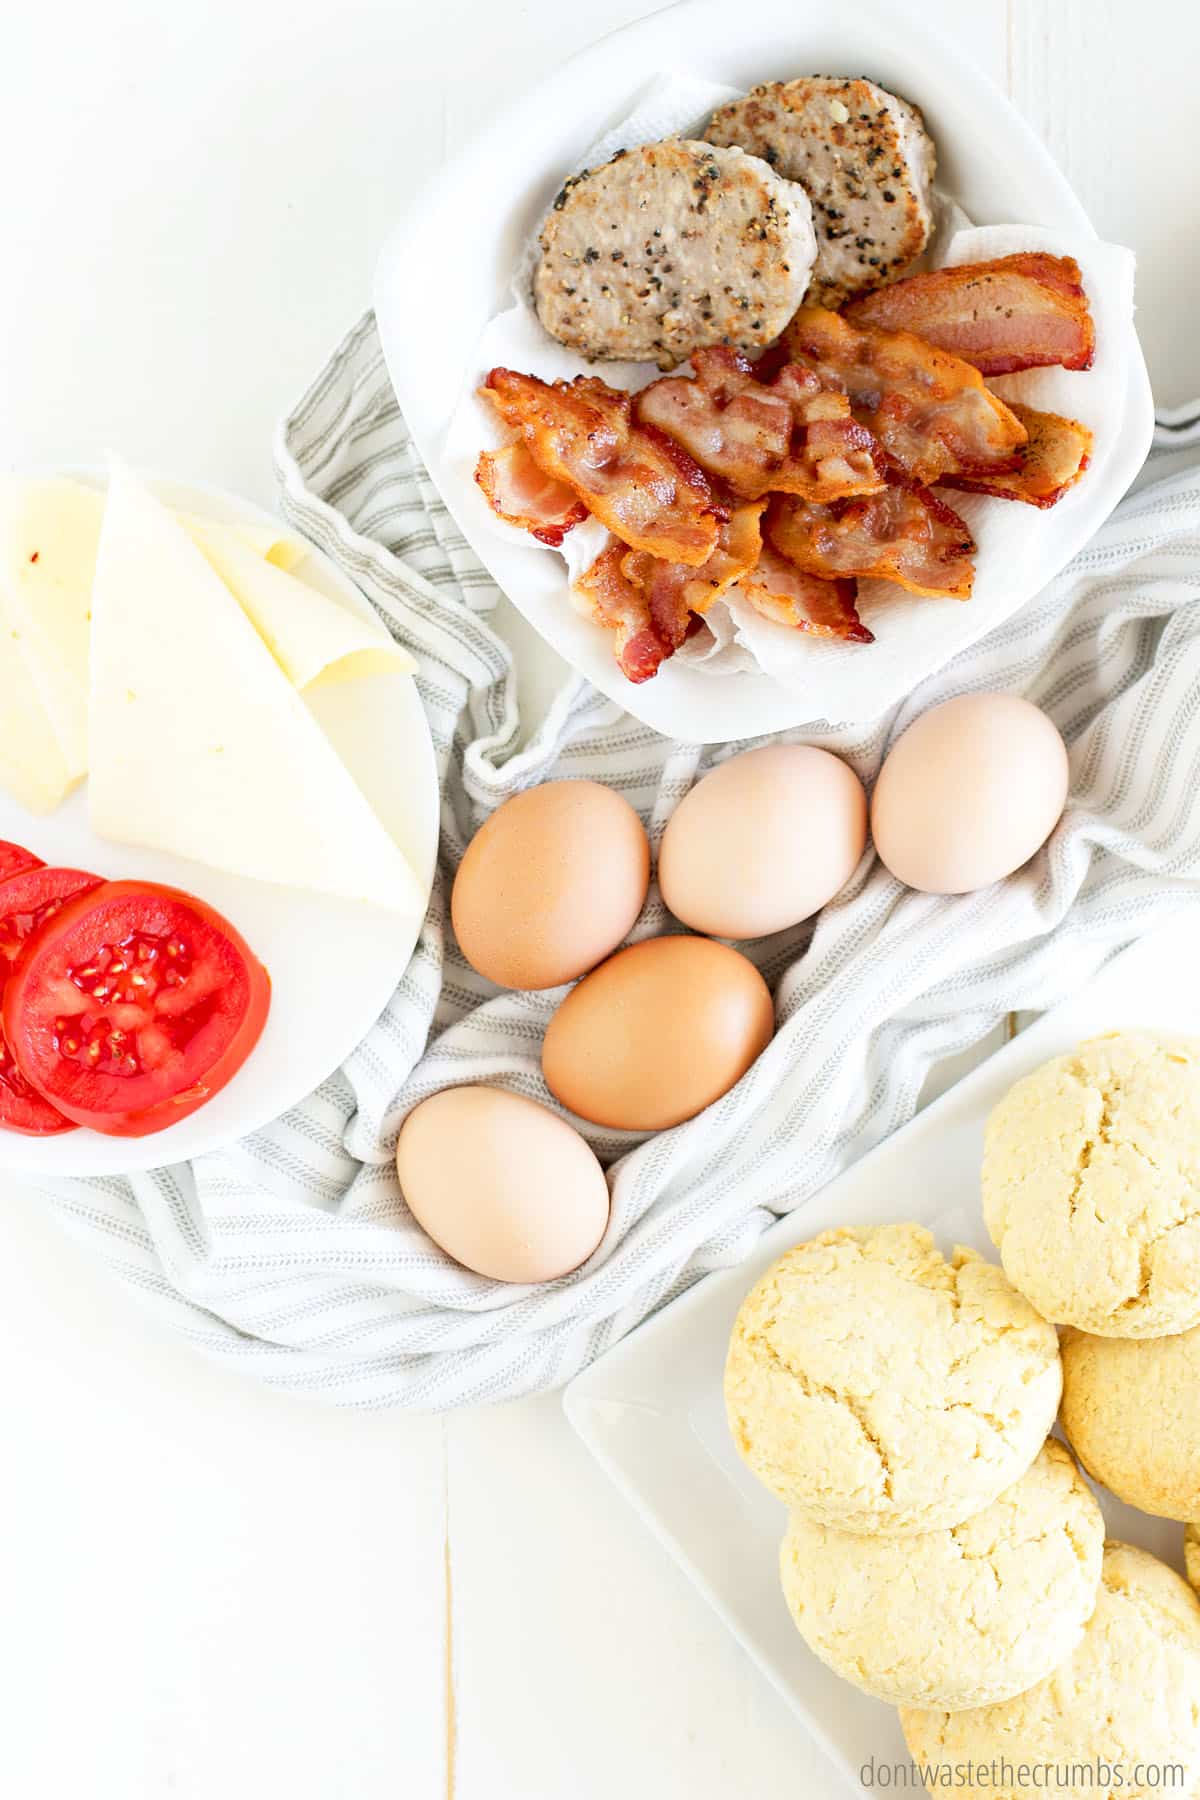 Ingredients for breakfast sandwich: sausage, bacon, cheese, sliced tomato, eggs, and biscuits.